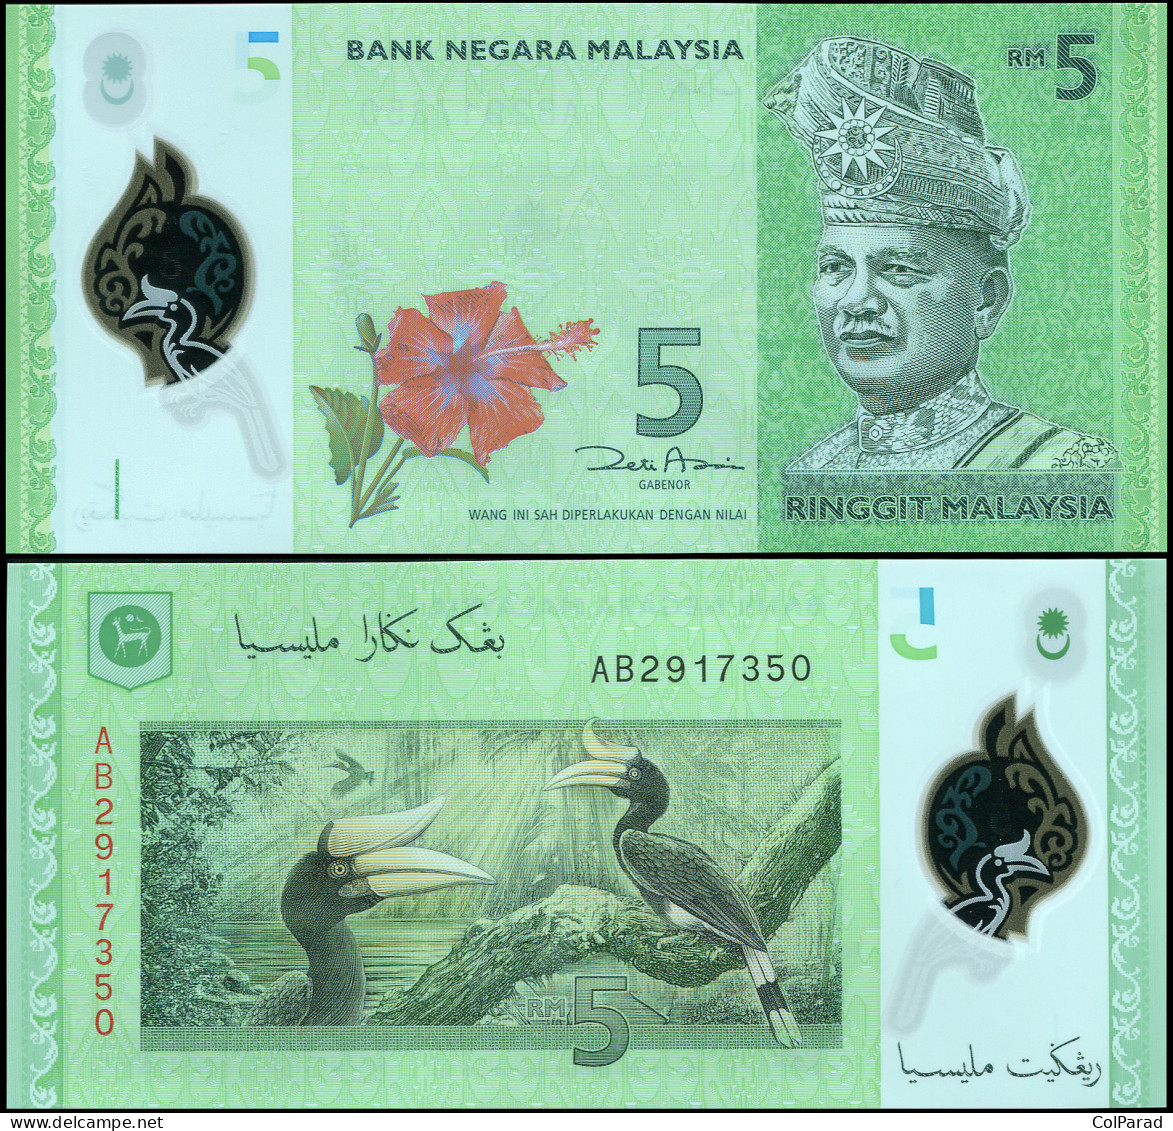 MALAYSIA 5 RINGGIT - ND (2012) - Polymer Unc - P.52a Banknote - Maleisië